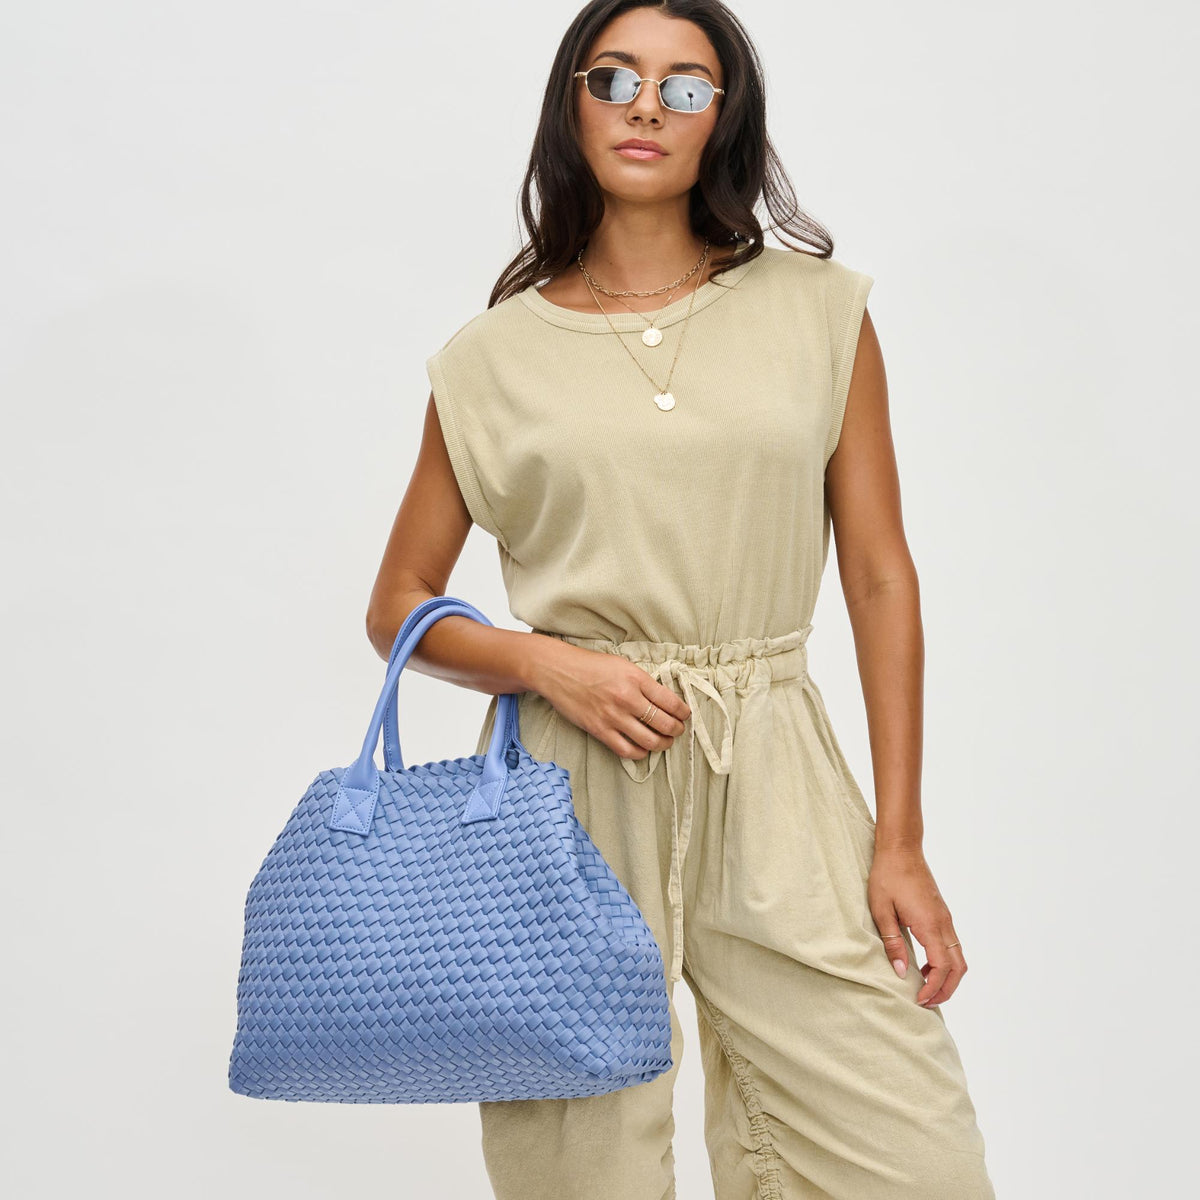 Woman wearing Periwinkle Urban Expressions Ithaca - Woven Neoprene Tote 840611128751 View 2 | Periwinkle